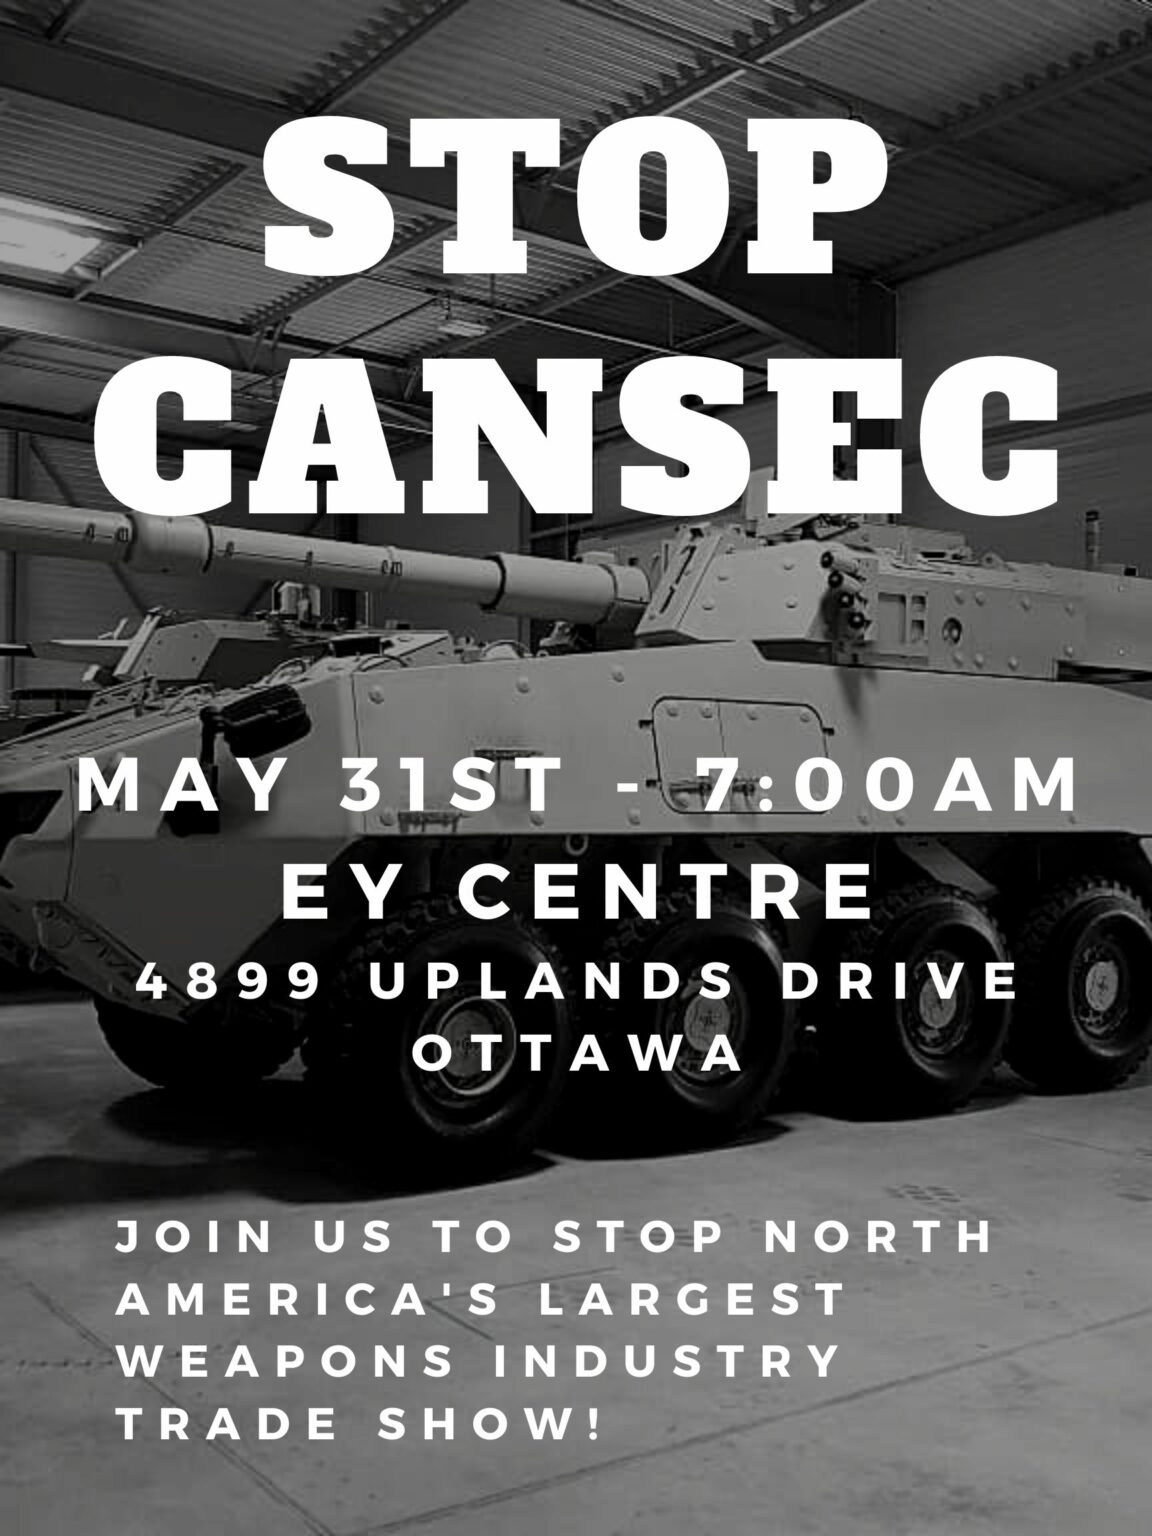 CANSEC 2024